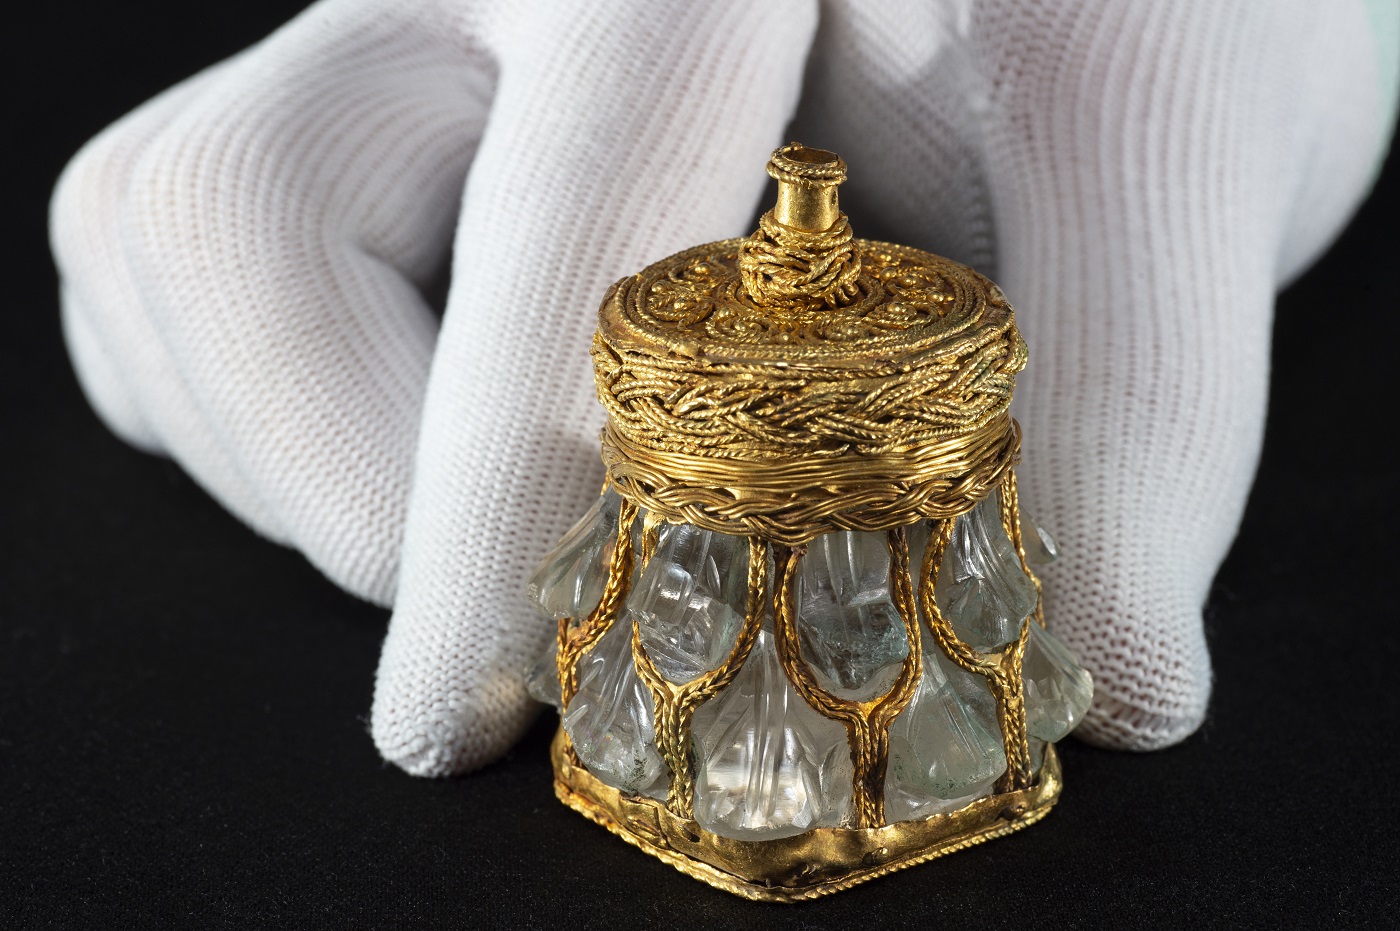 The gold-mounted rock crystal jar with a hand for scale. © Neil Hanna